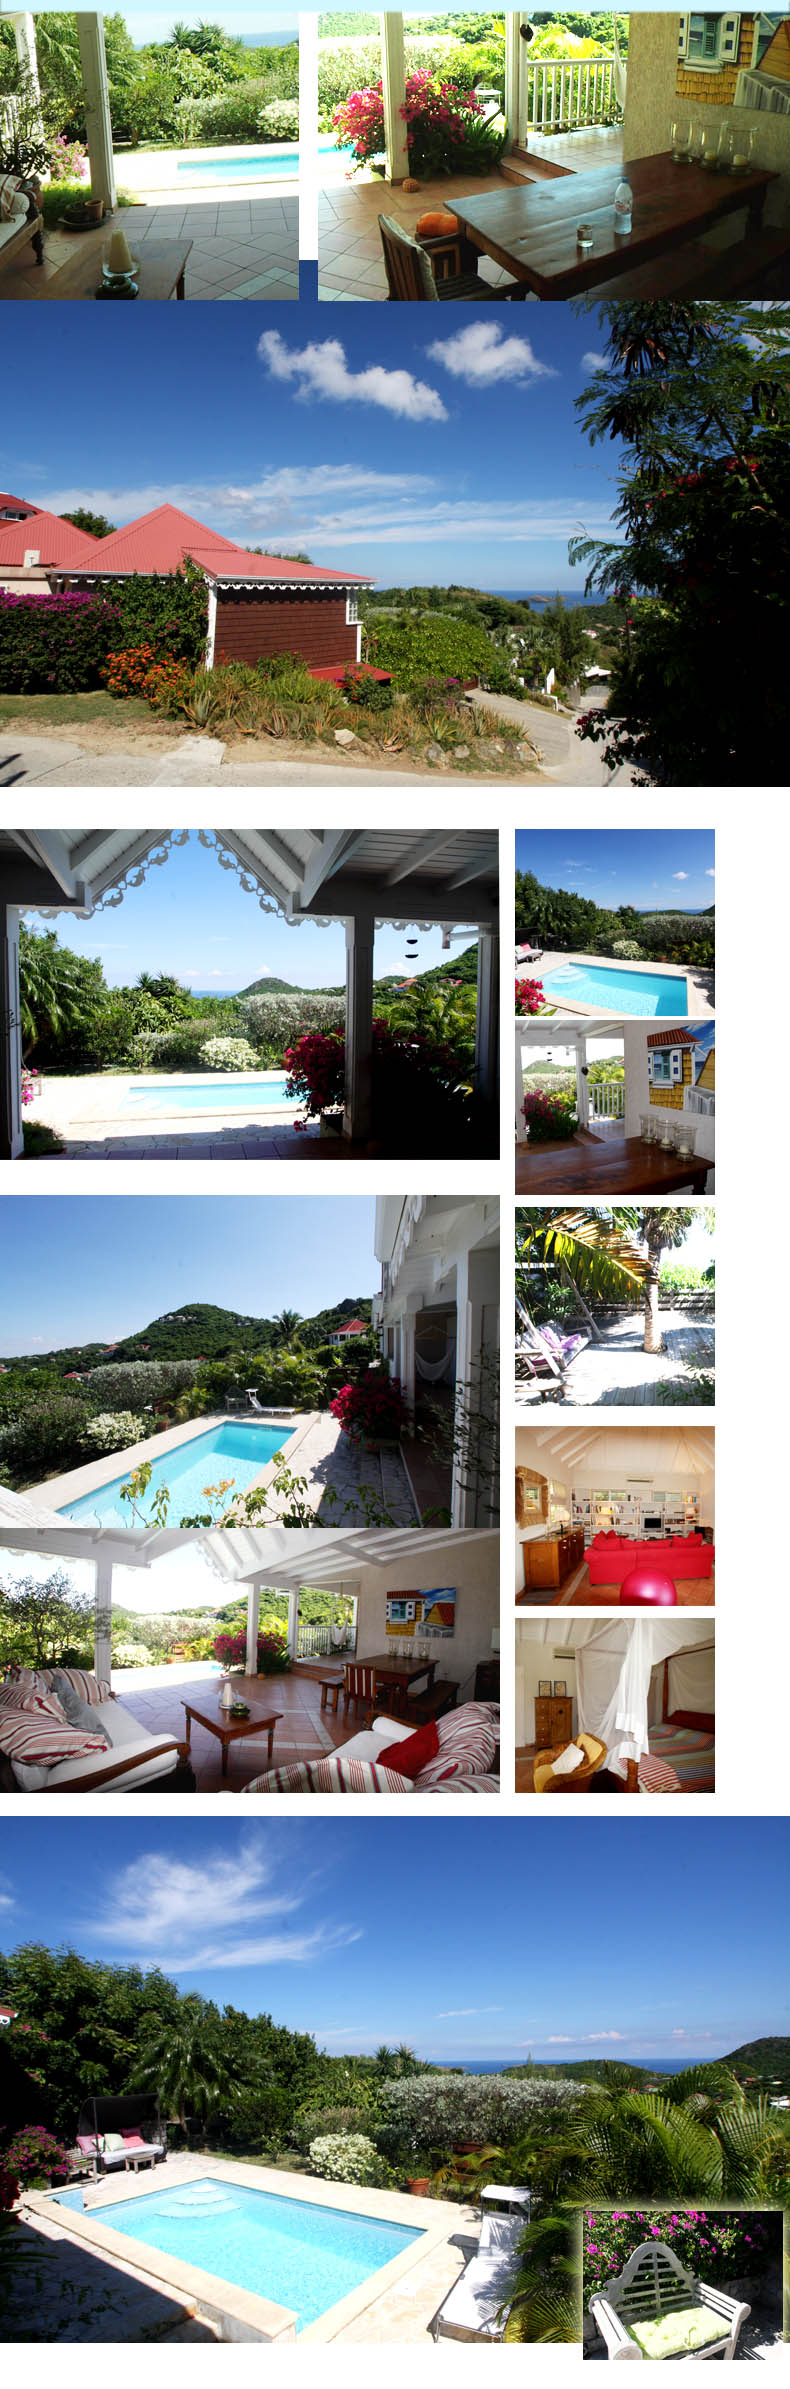 looking for a homy place to stay in St Barts?